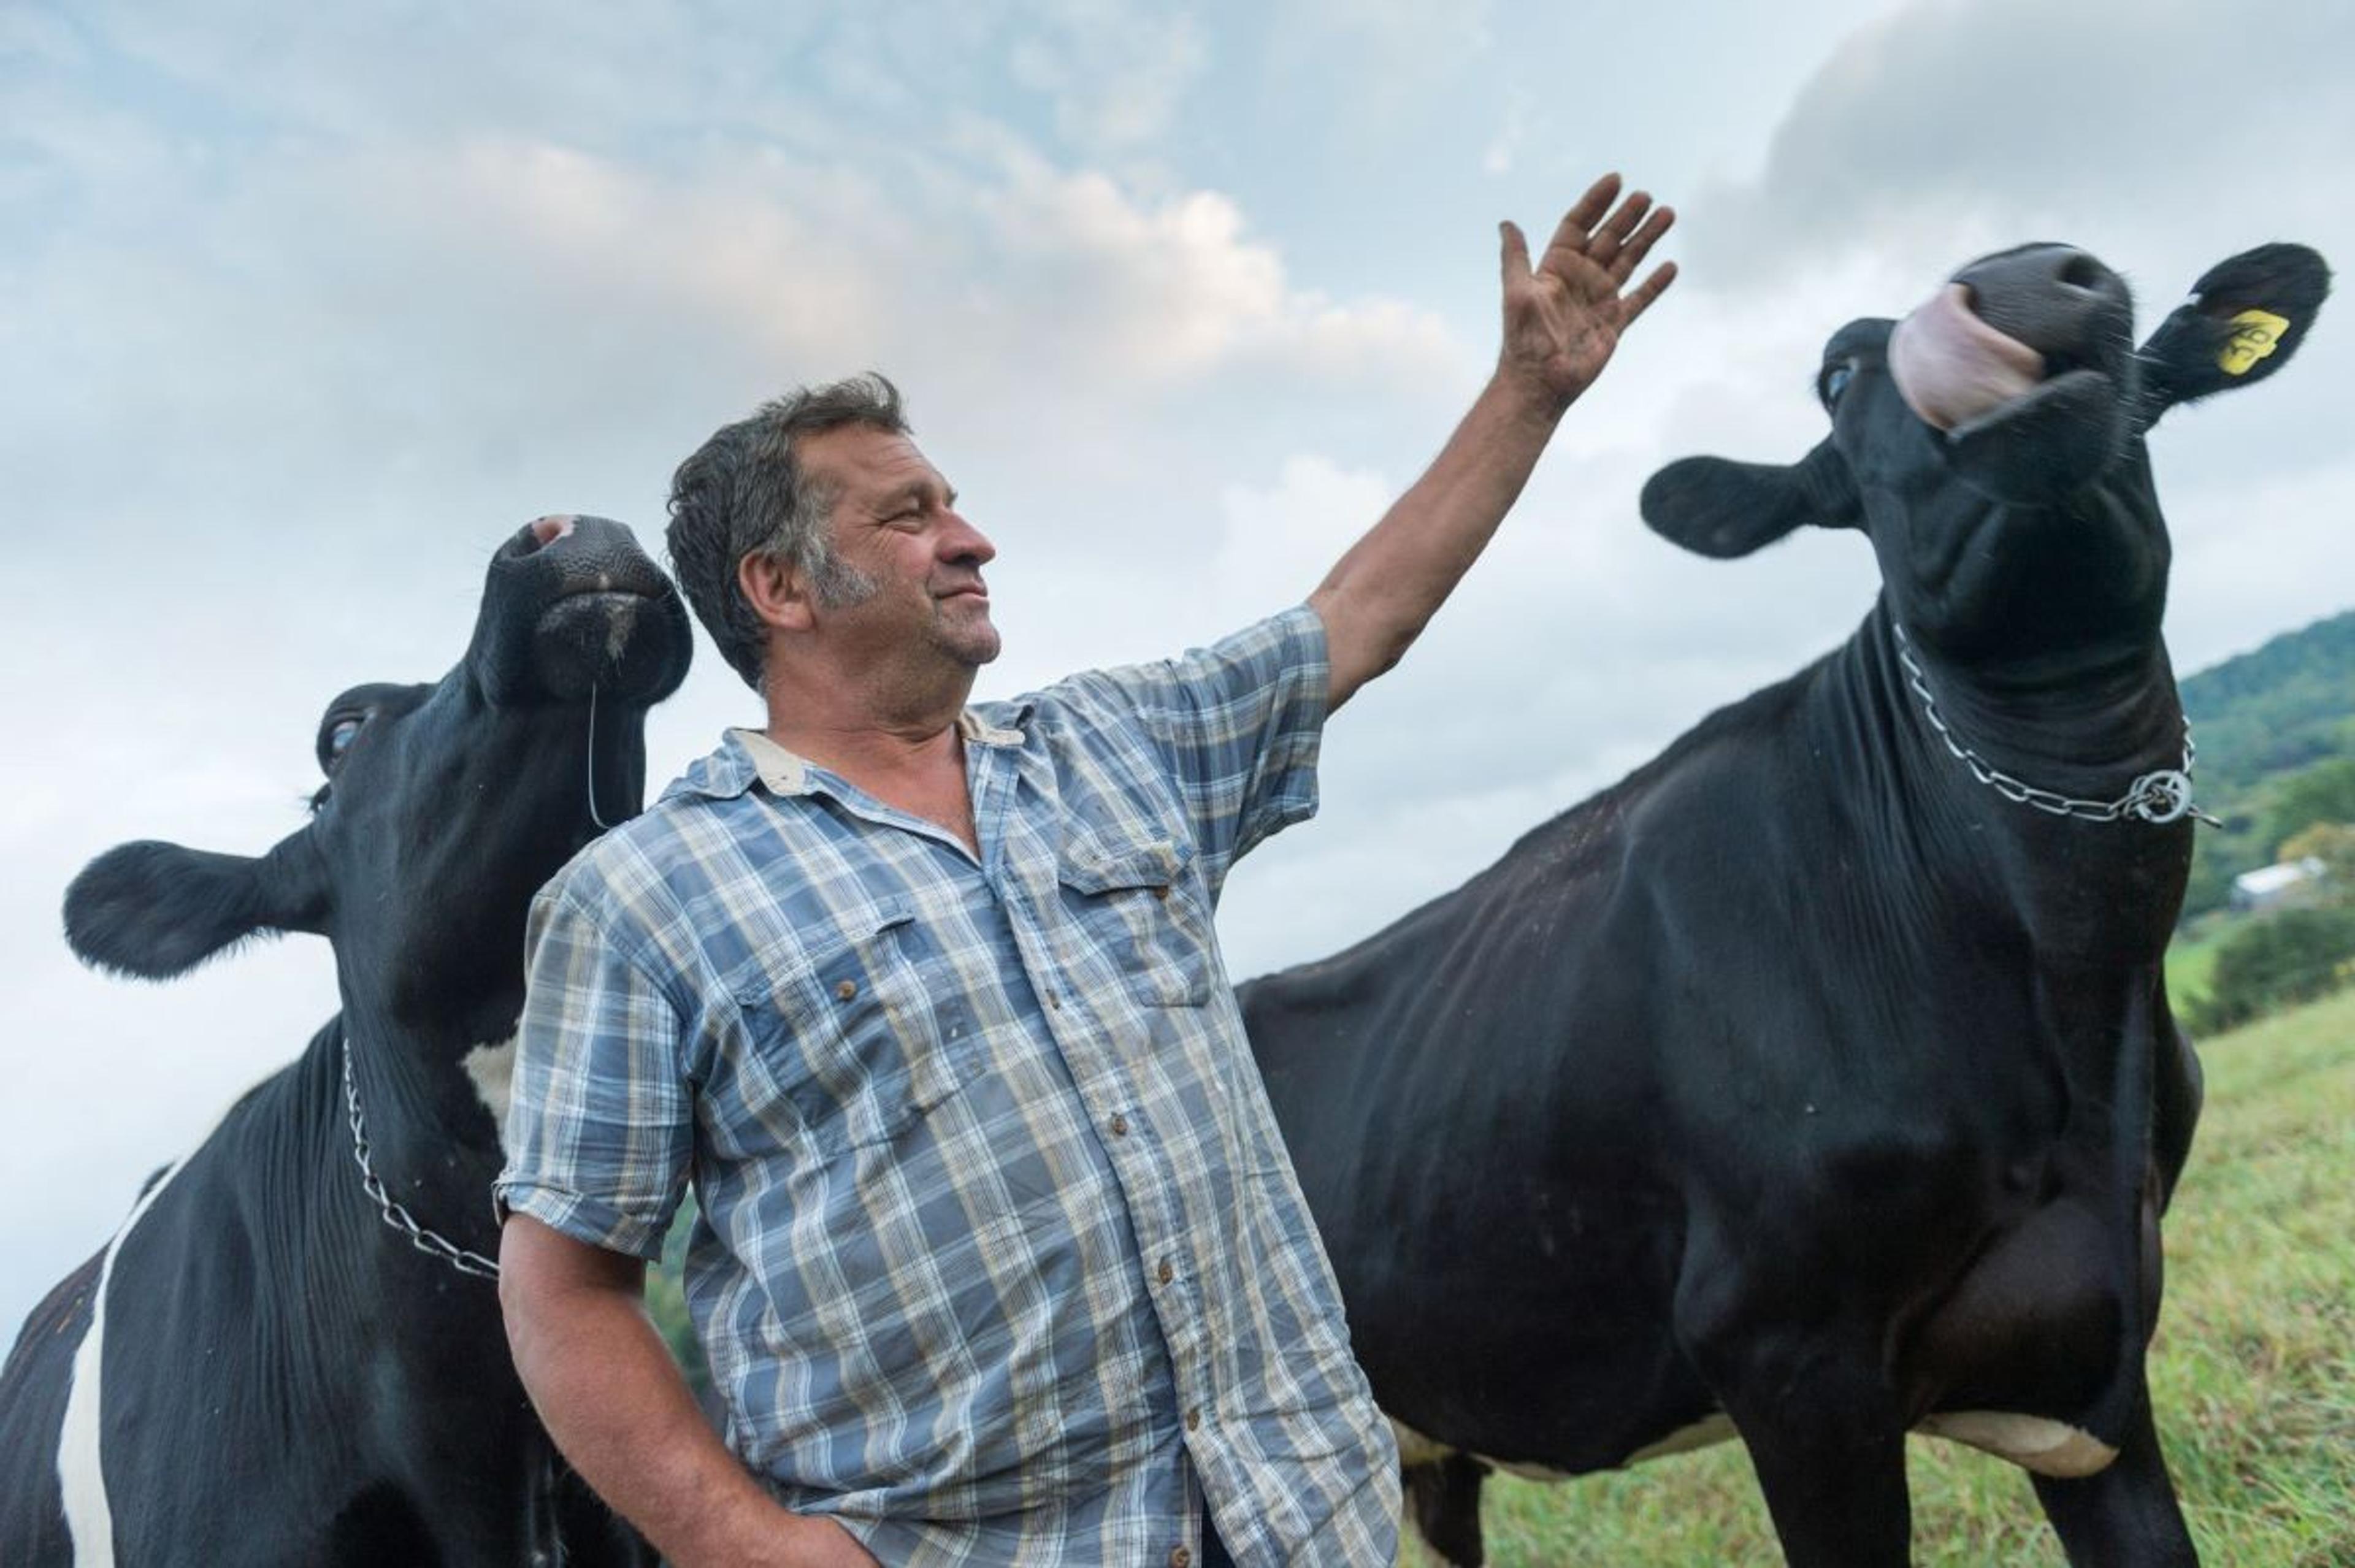 Two cows gather around Les Miller at his organic farm in New York.